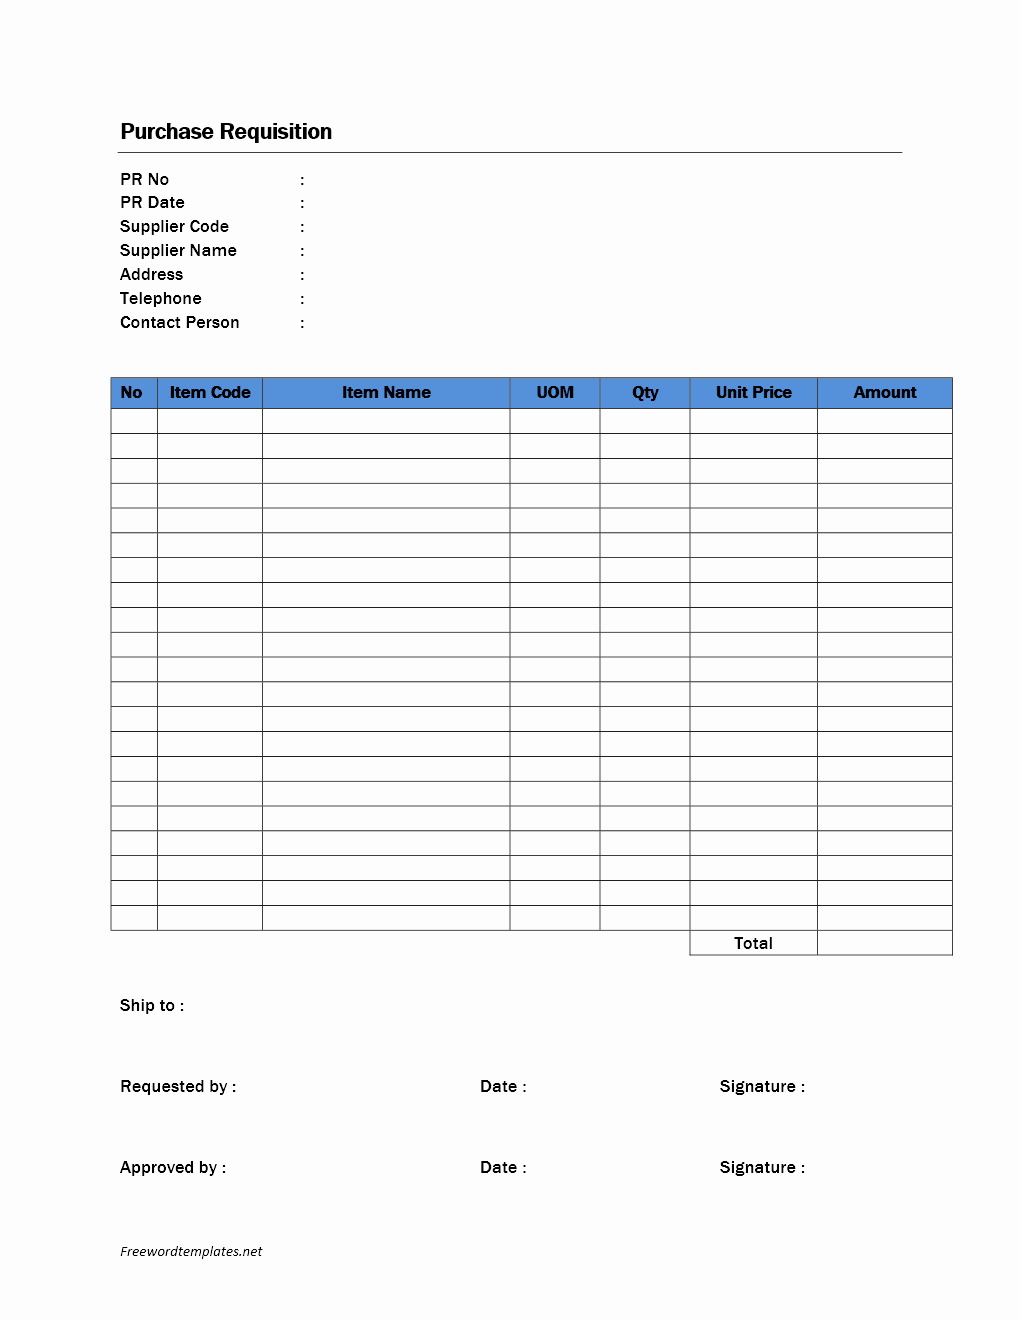 Microsoft Office Purchase order Templates Fresh Purchase Requisition form